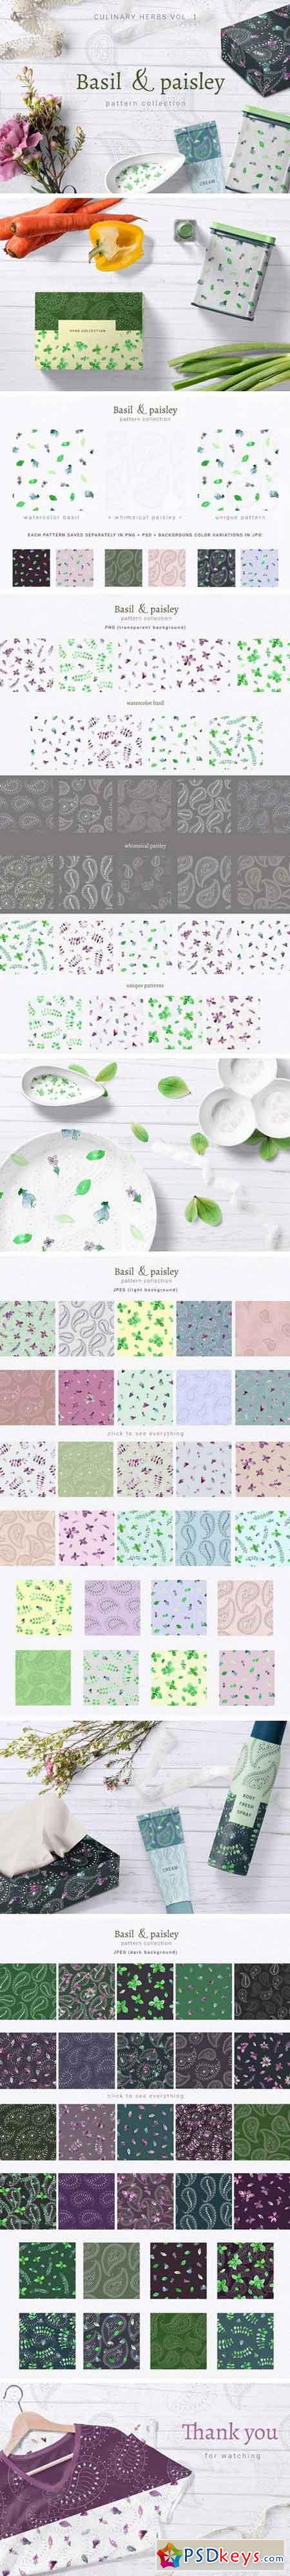 Basil & paisley - pattern collection 2257418